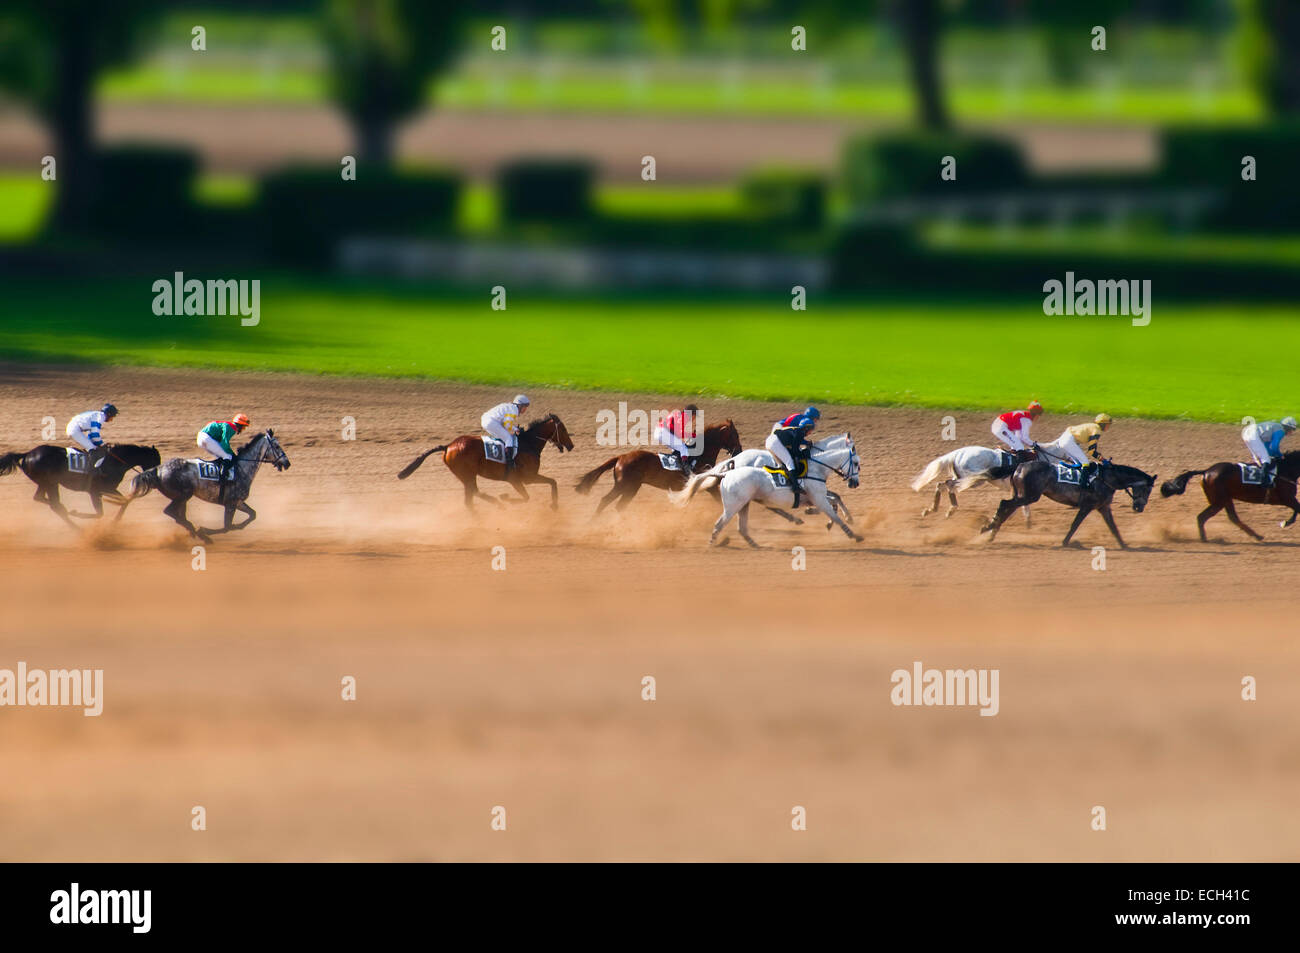 horse race with miniature effect Stock Photo